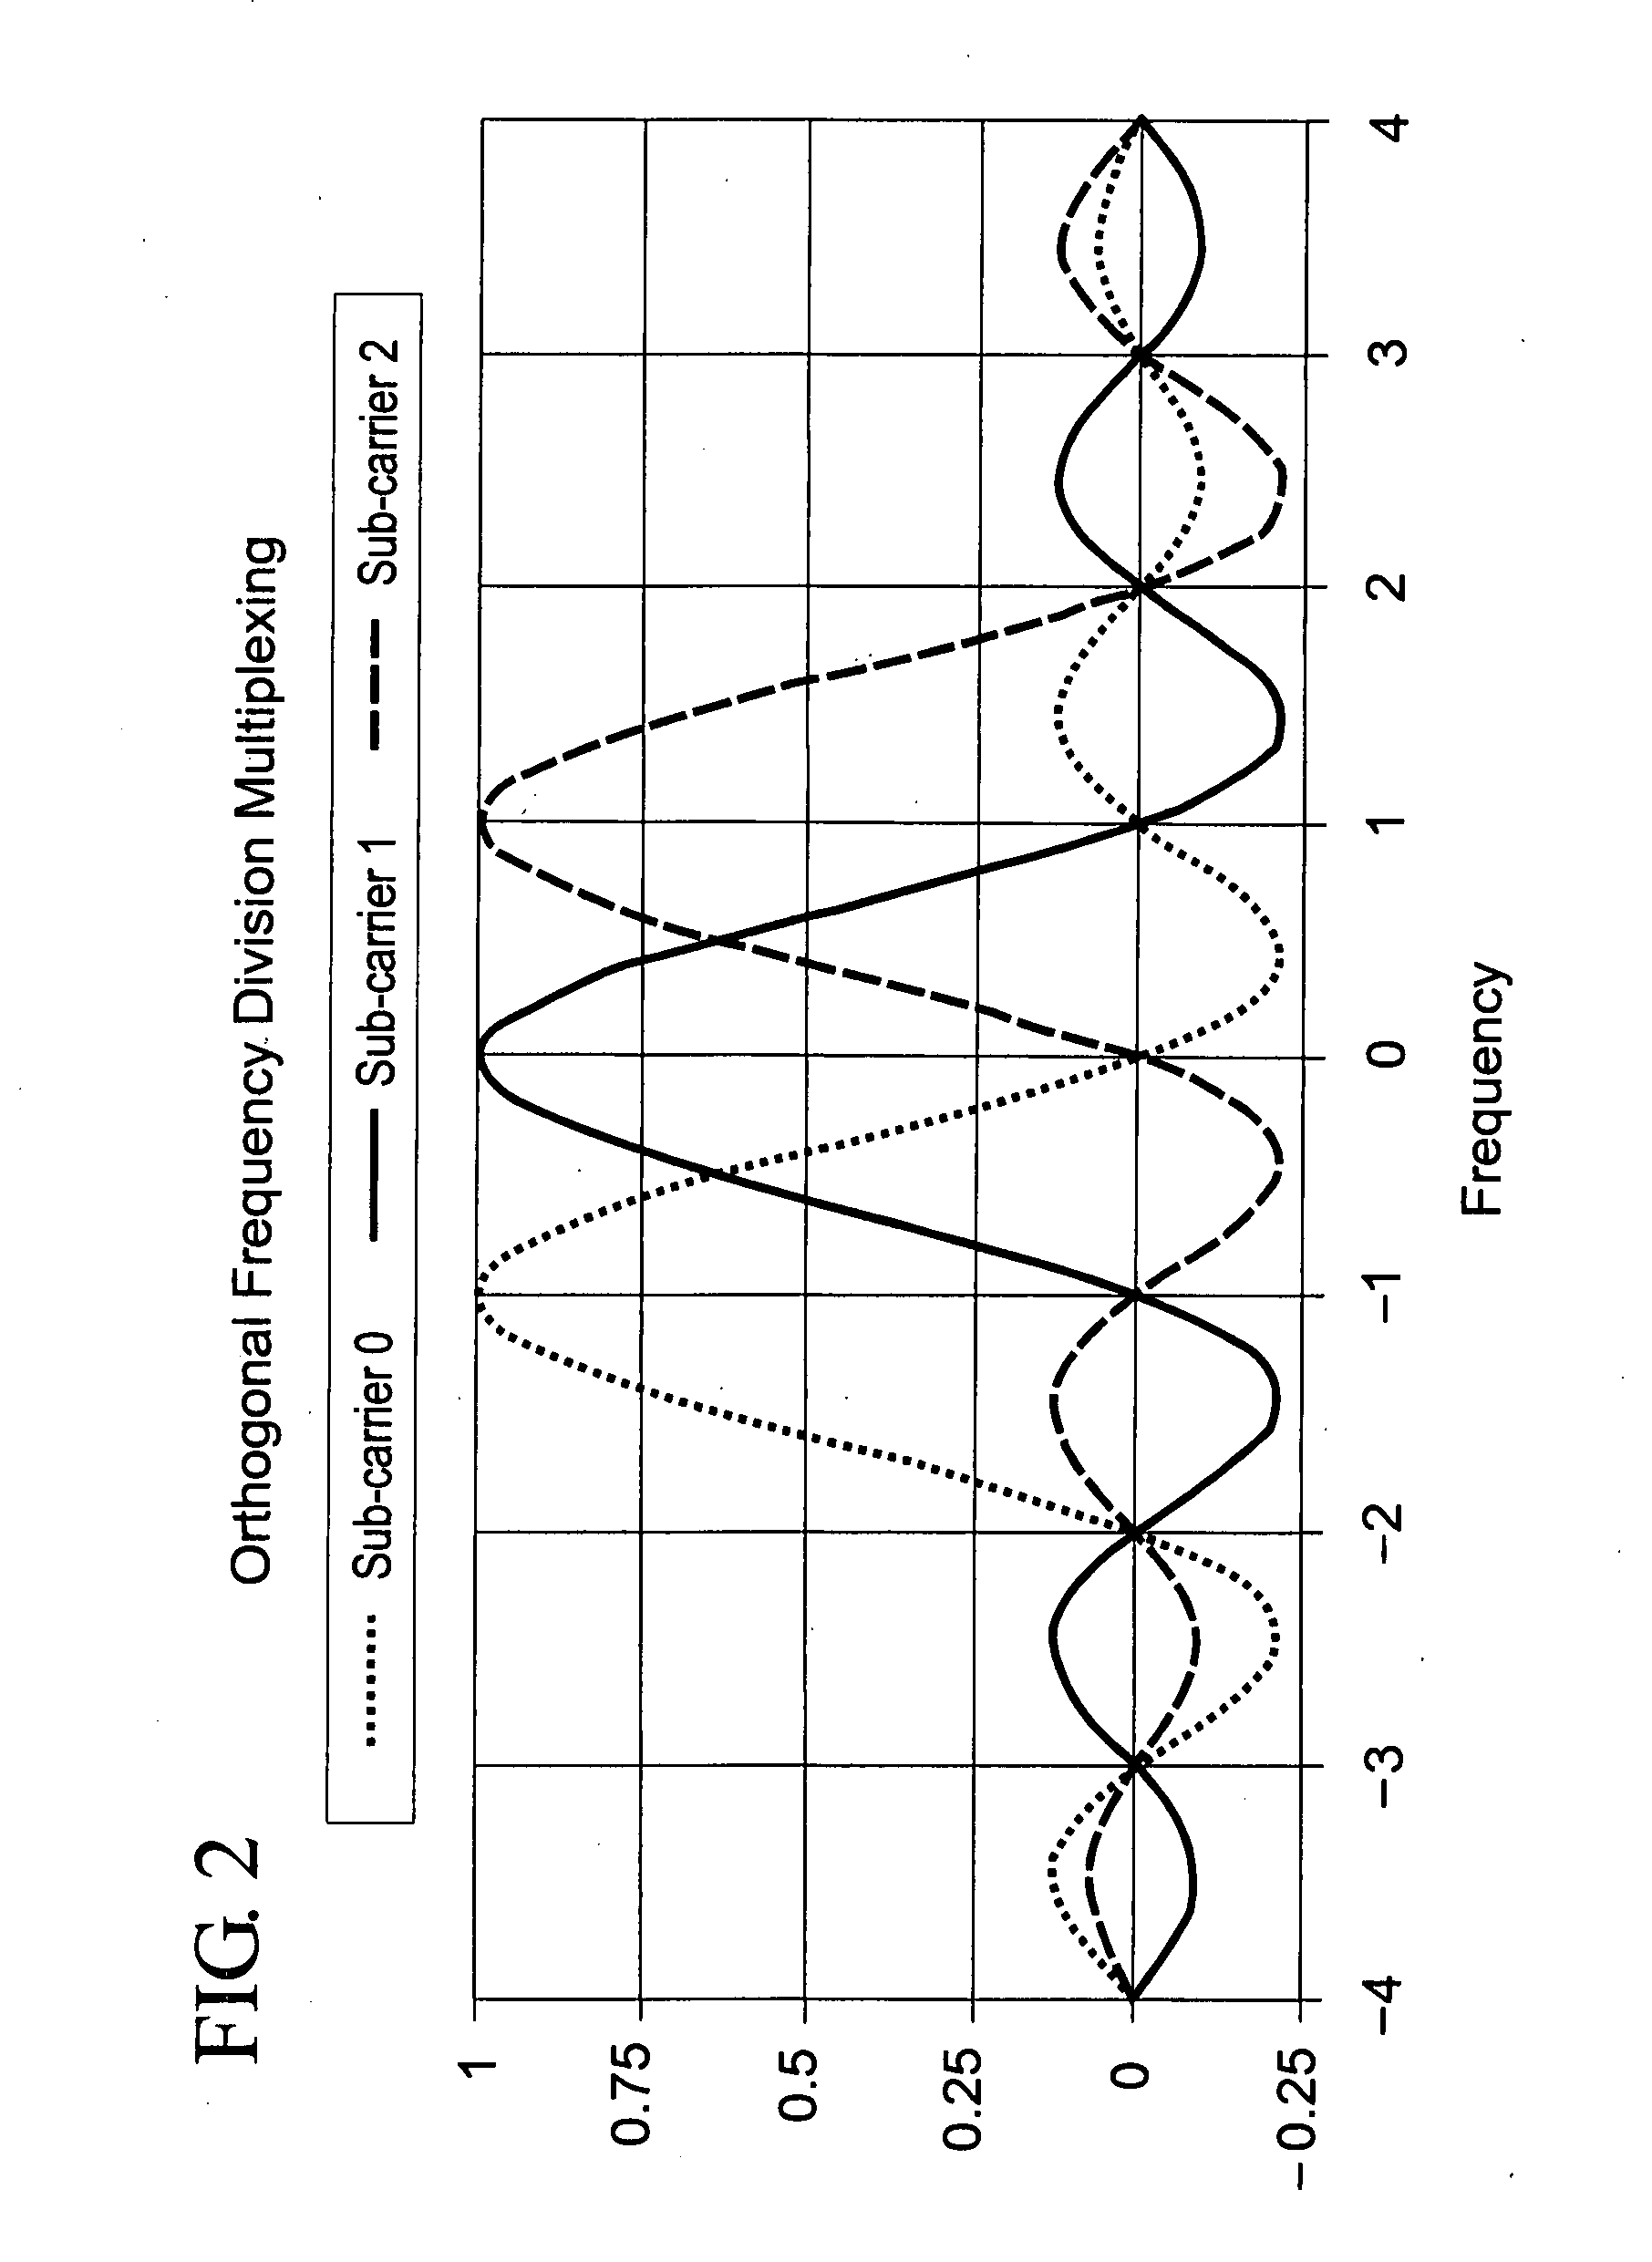 Methods and apparatus for mapping control channels to resources in OFDM systems